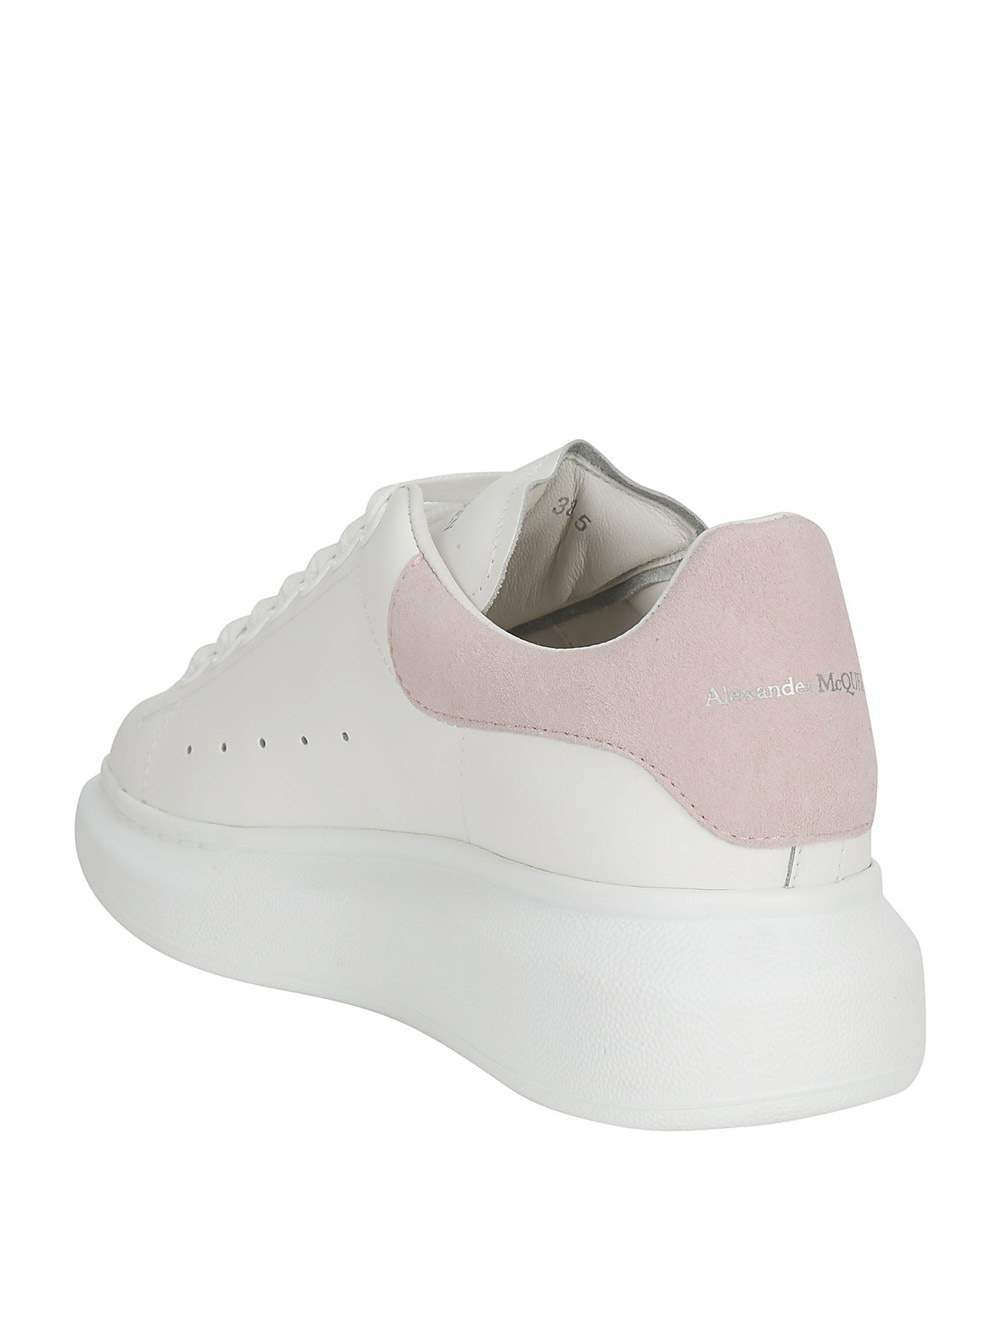 Alexander Mcqueen Trainers In White/patch